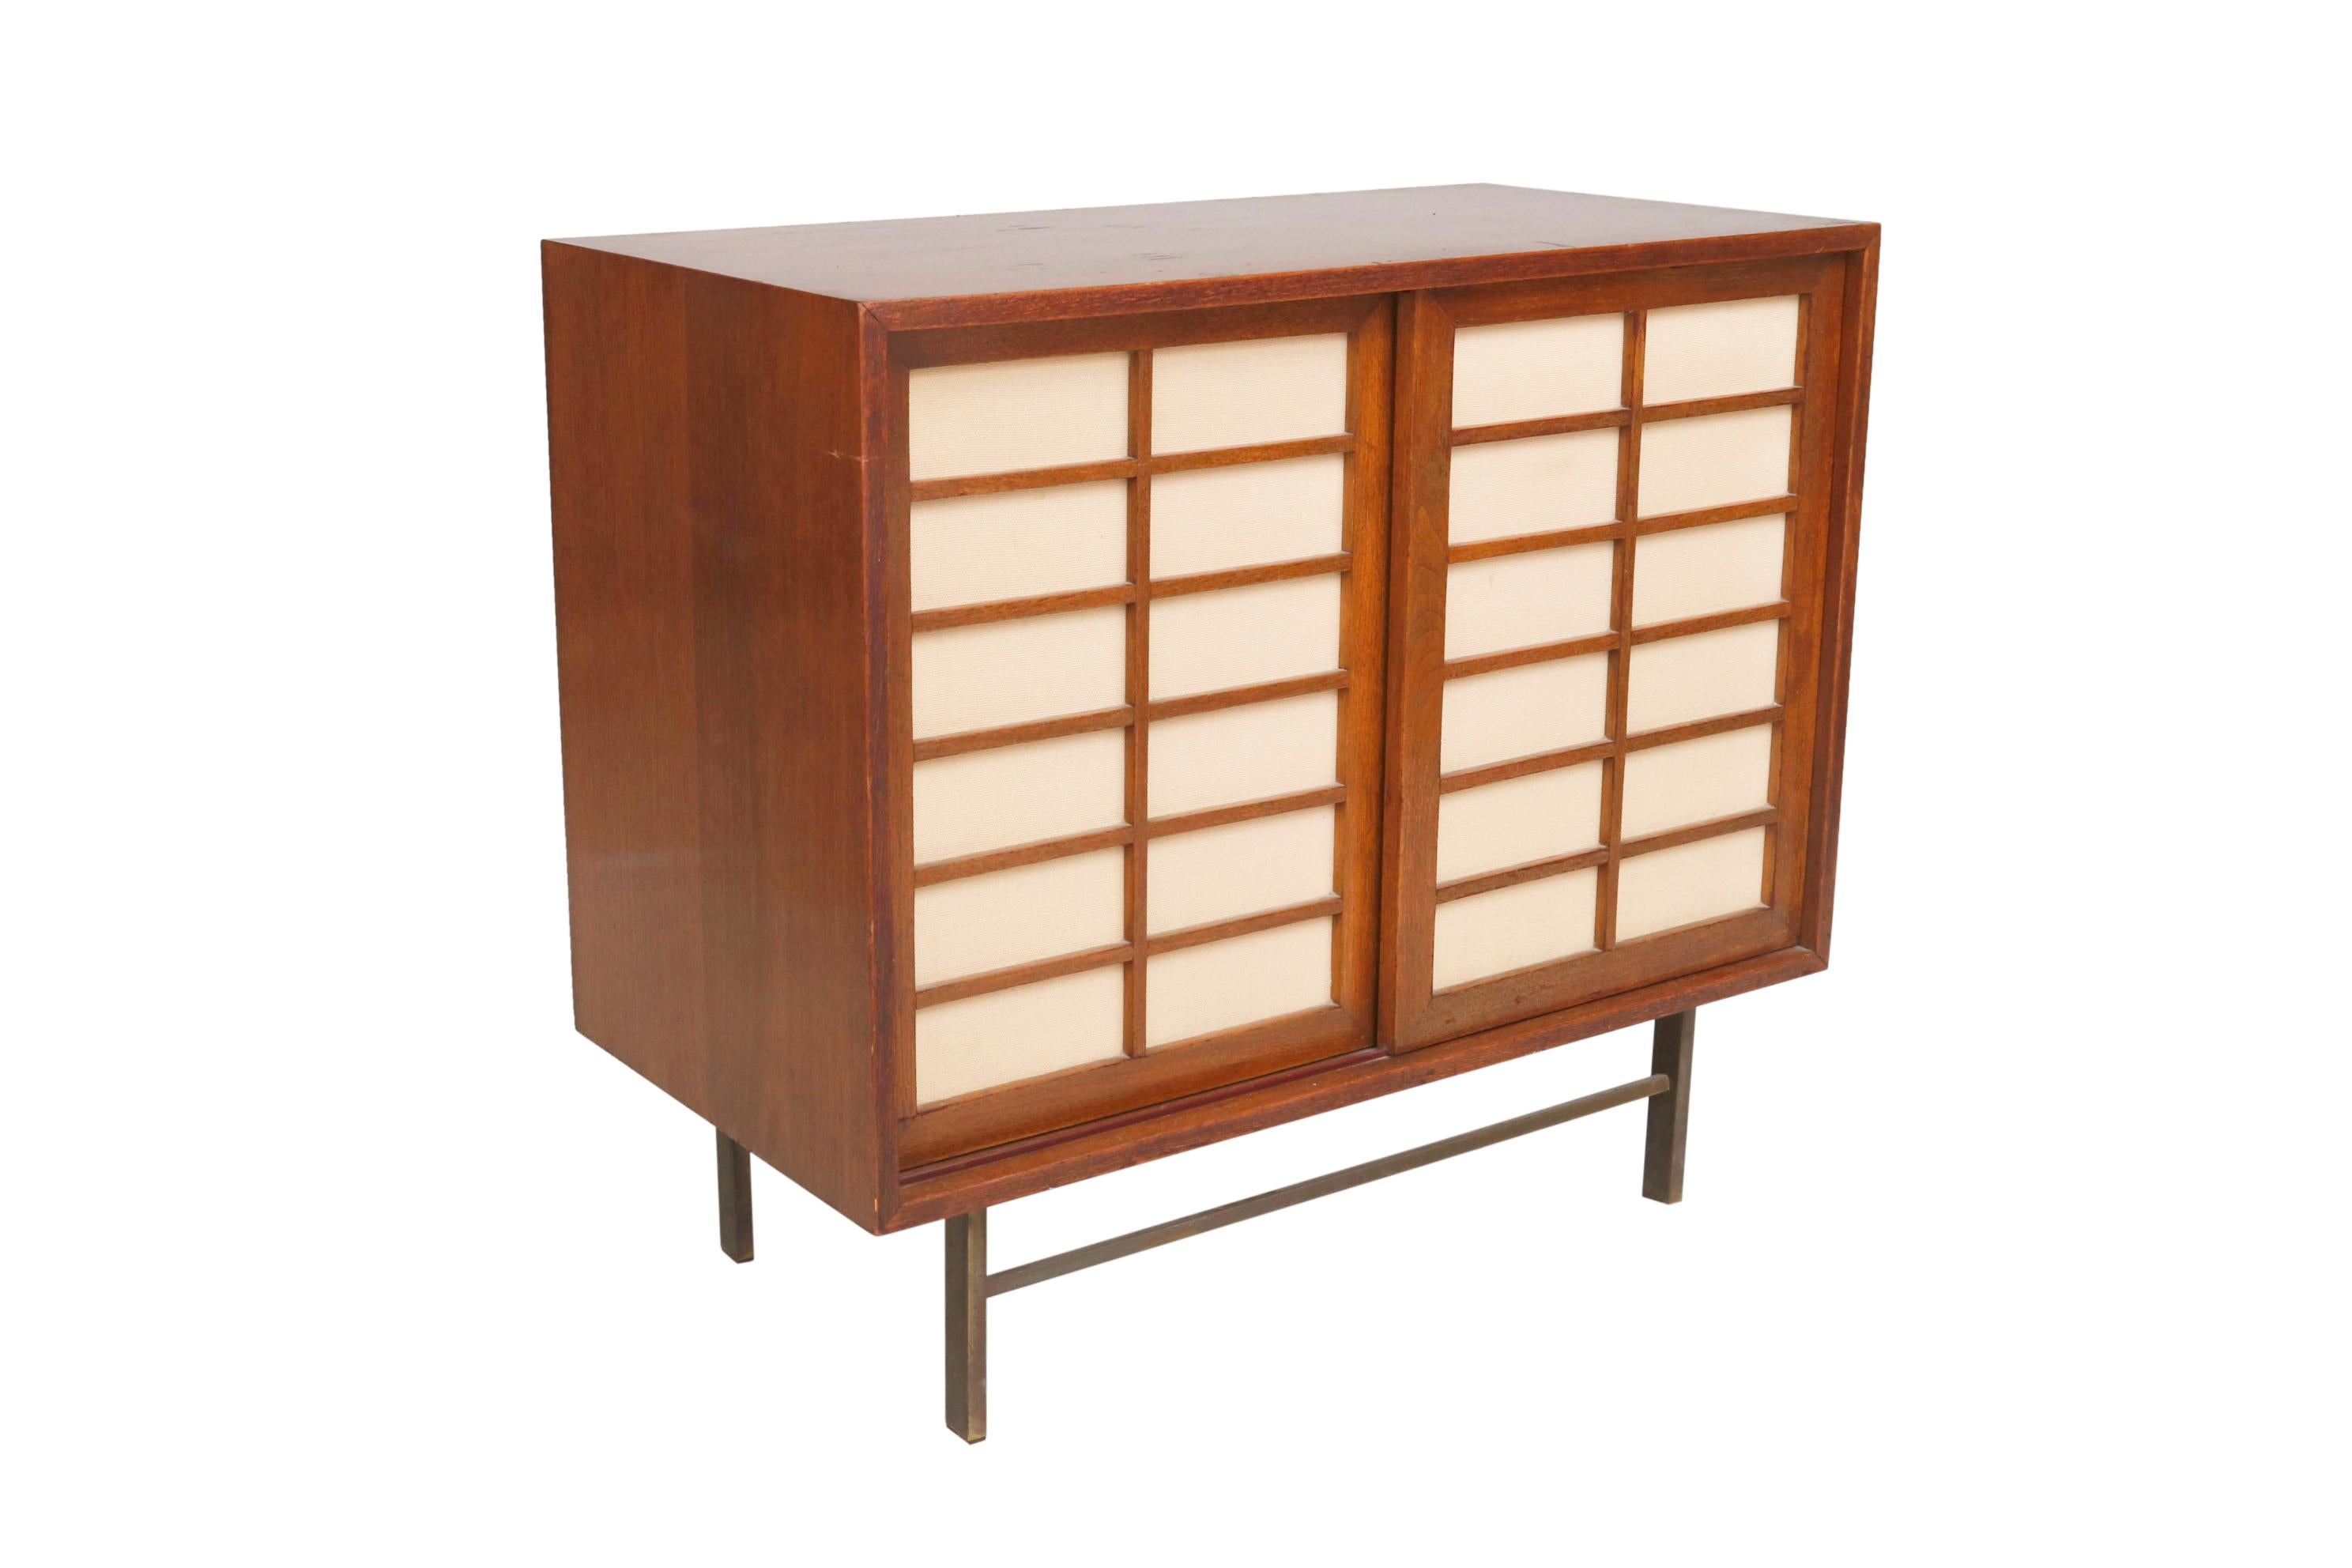 A compact midcentury cabinet. Brass stretcher base sliding doors interior shelves and drawers
Dimensions: 36